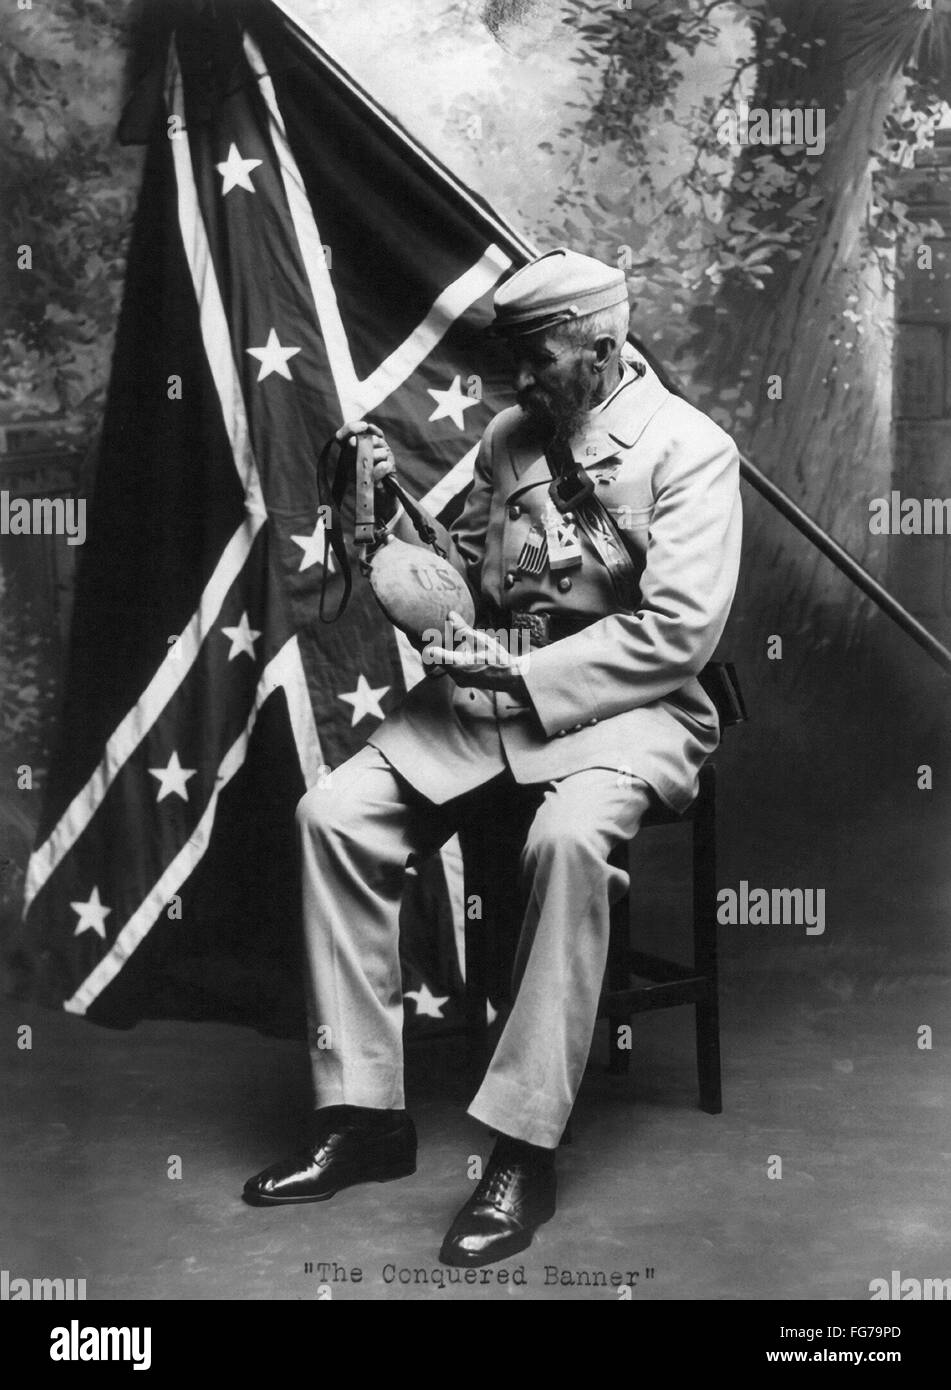 CIVIL WAR VETERAN, c1913. /nUnidentified veteran seated in front of a Confederate flag. Photograph, c1913. Stock Photo